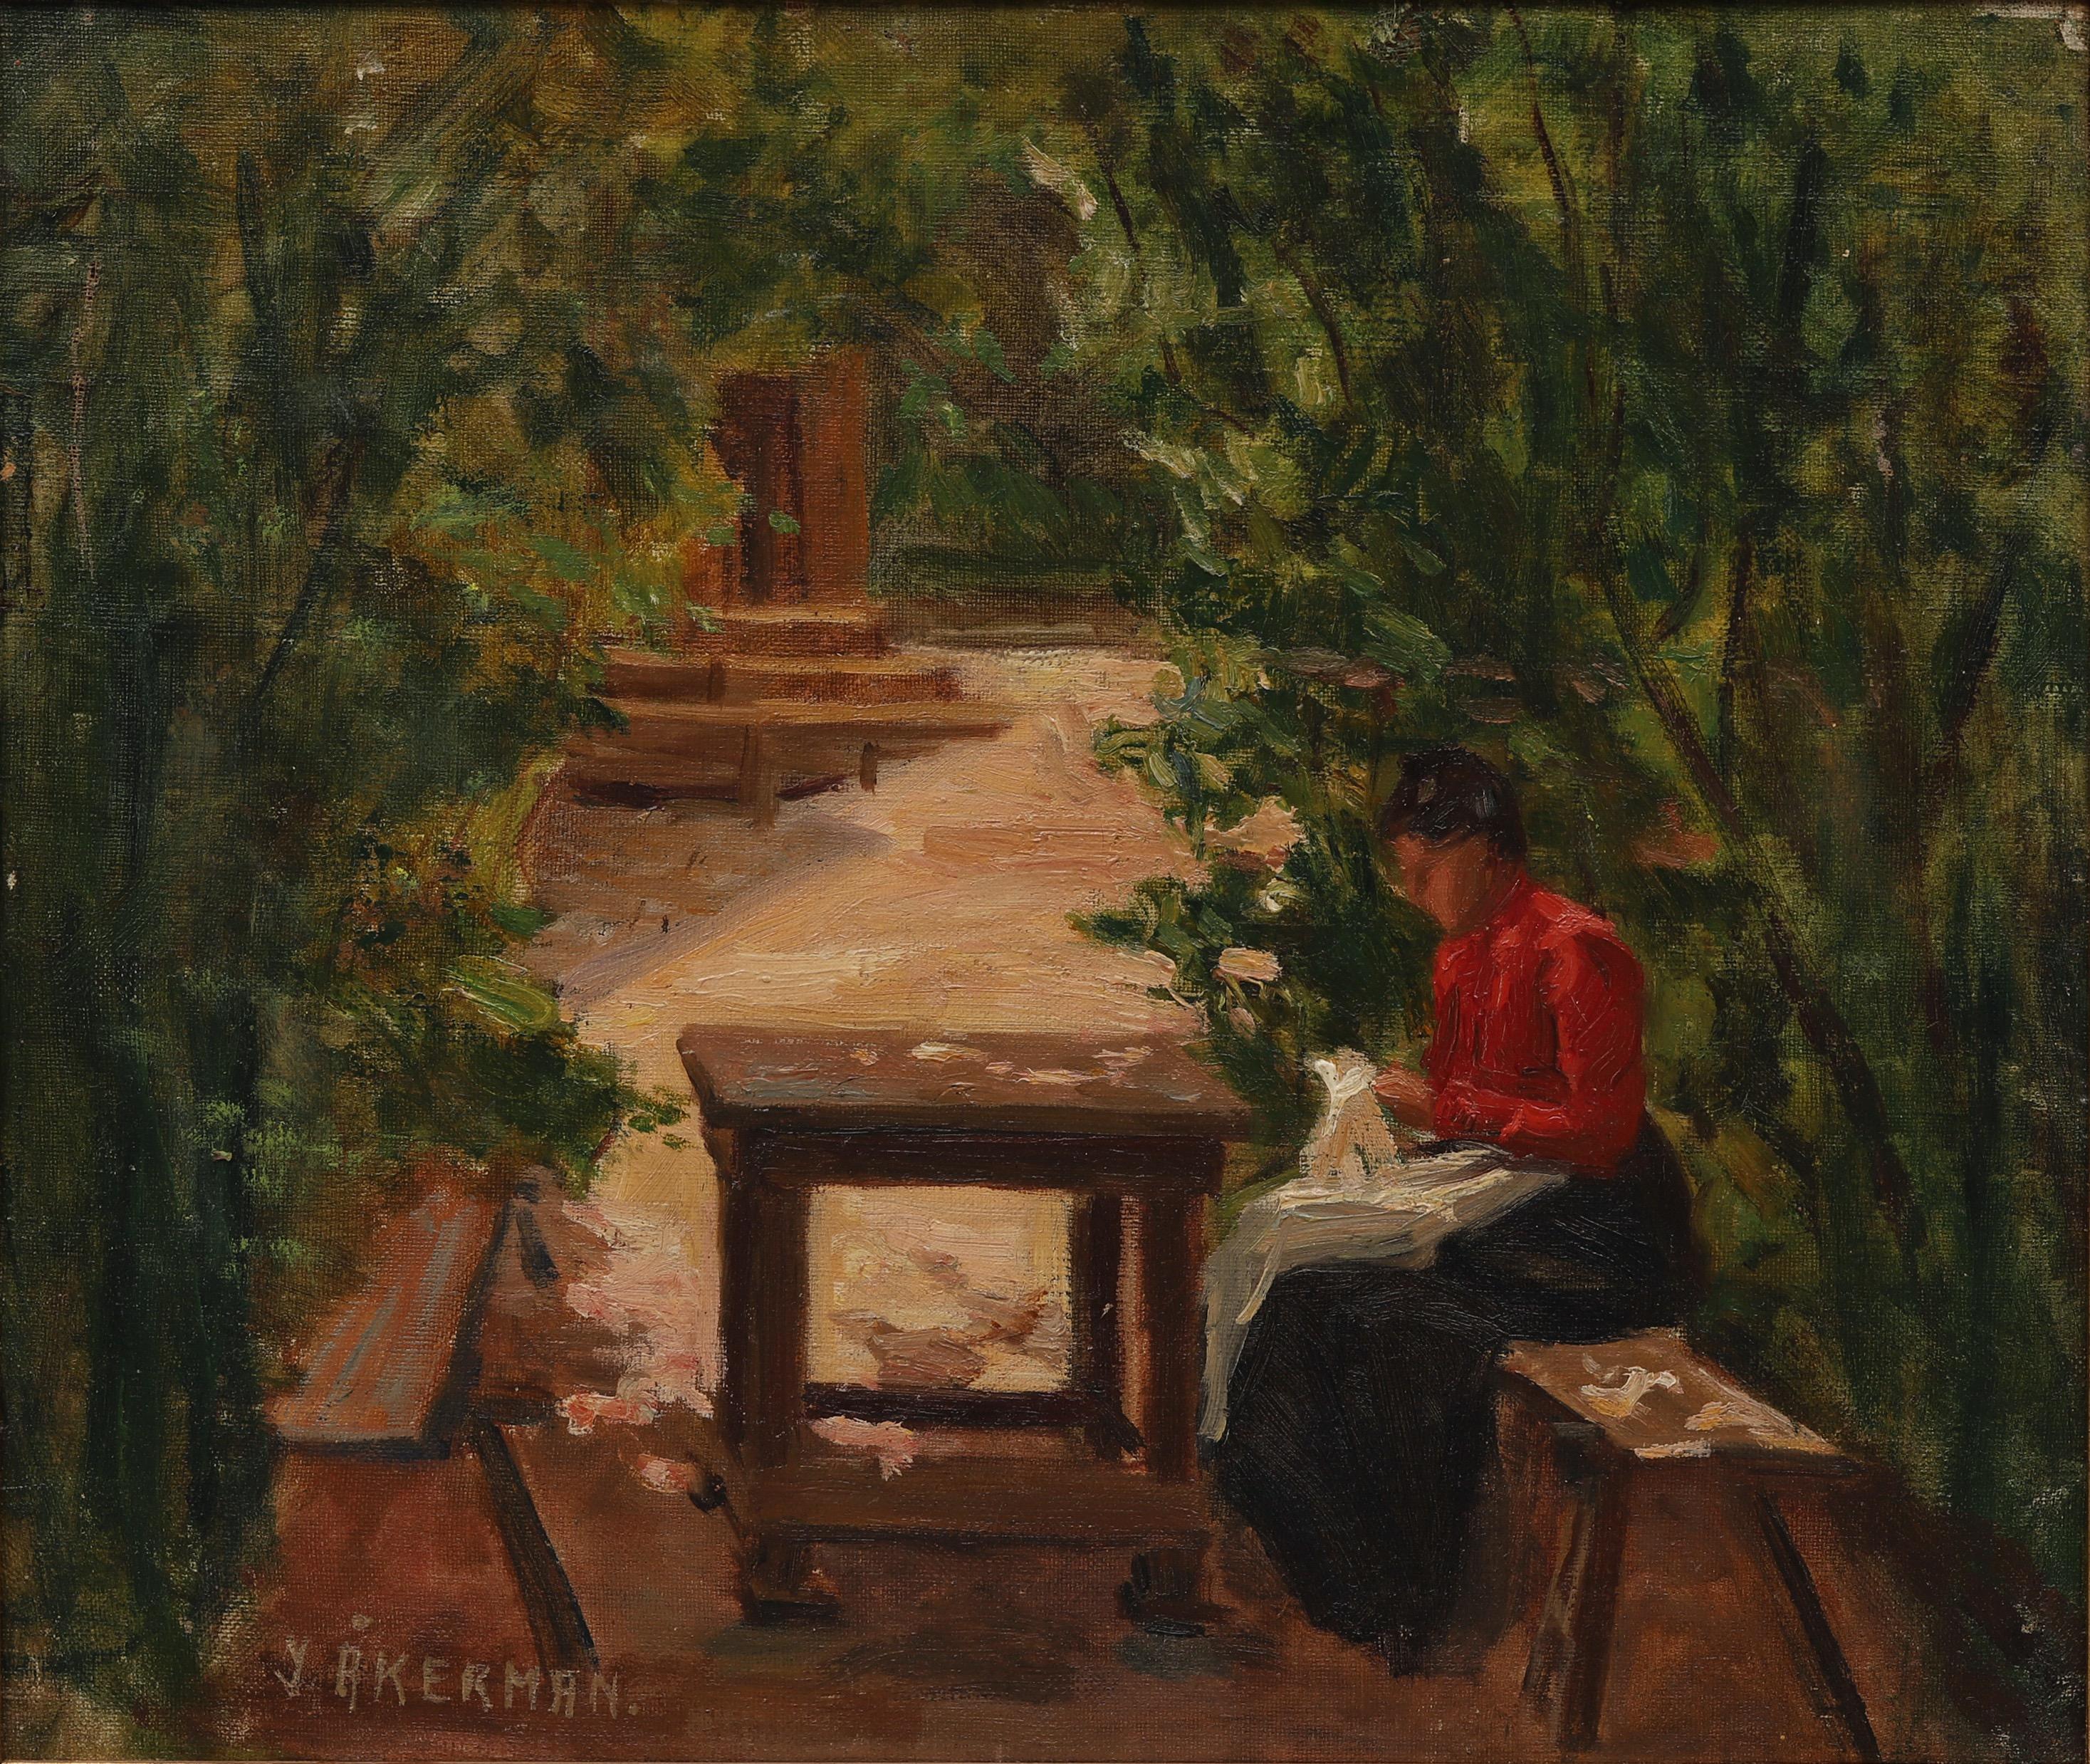 A beautifully painted motif by the female artist Ingeborg Åkerman (1881-1960) of a woman sitting in her garden shaded from the sun by the arbor where she is sewing. It is probably painted in the early 1900´s when she had just finished her studies at